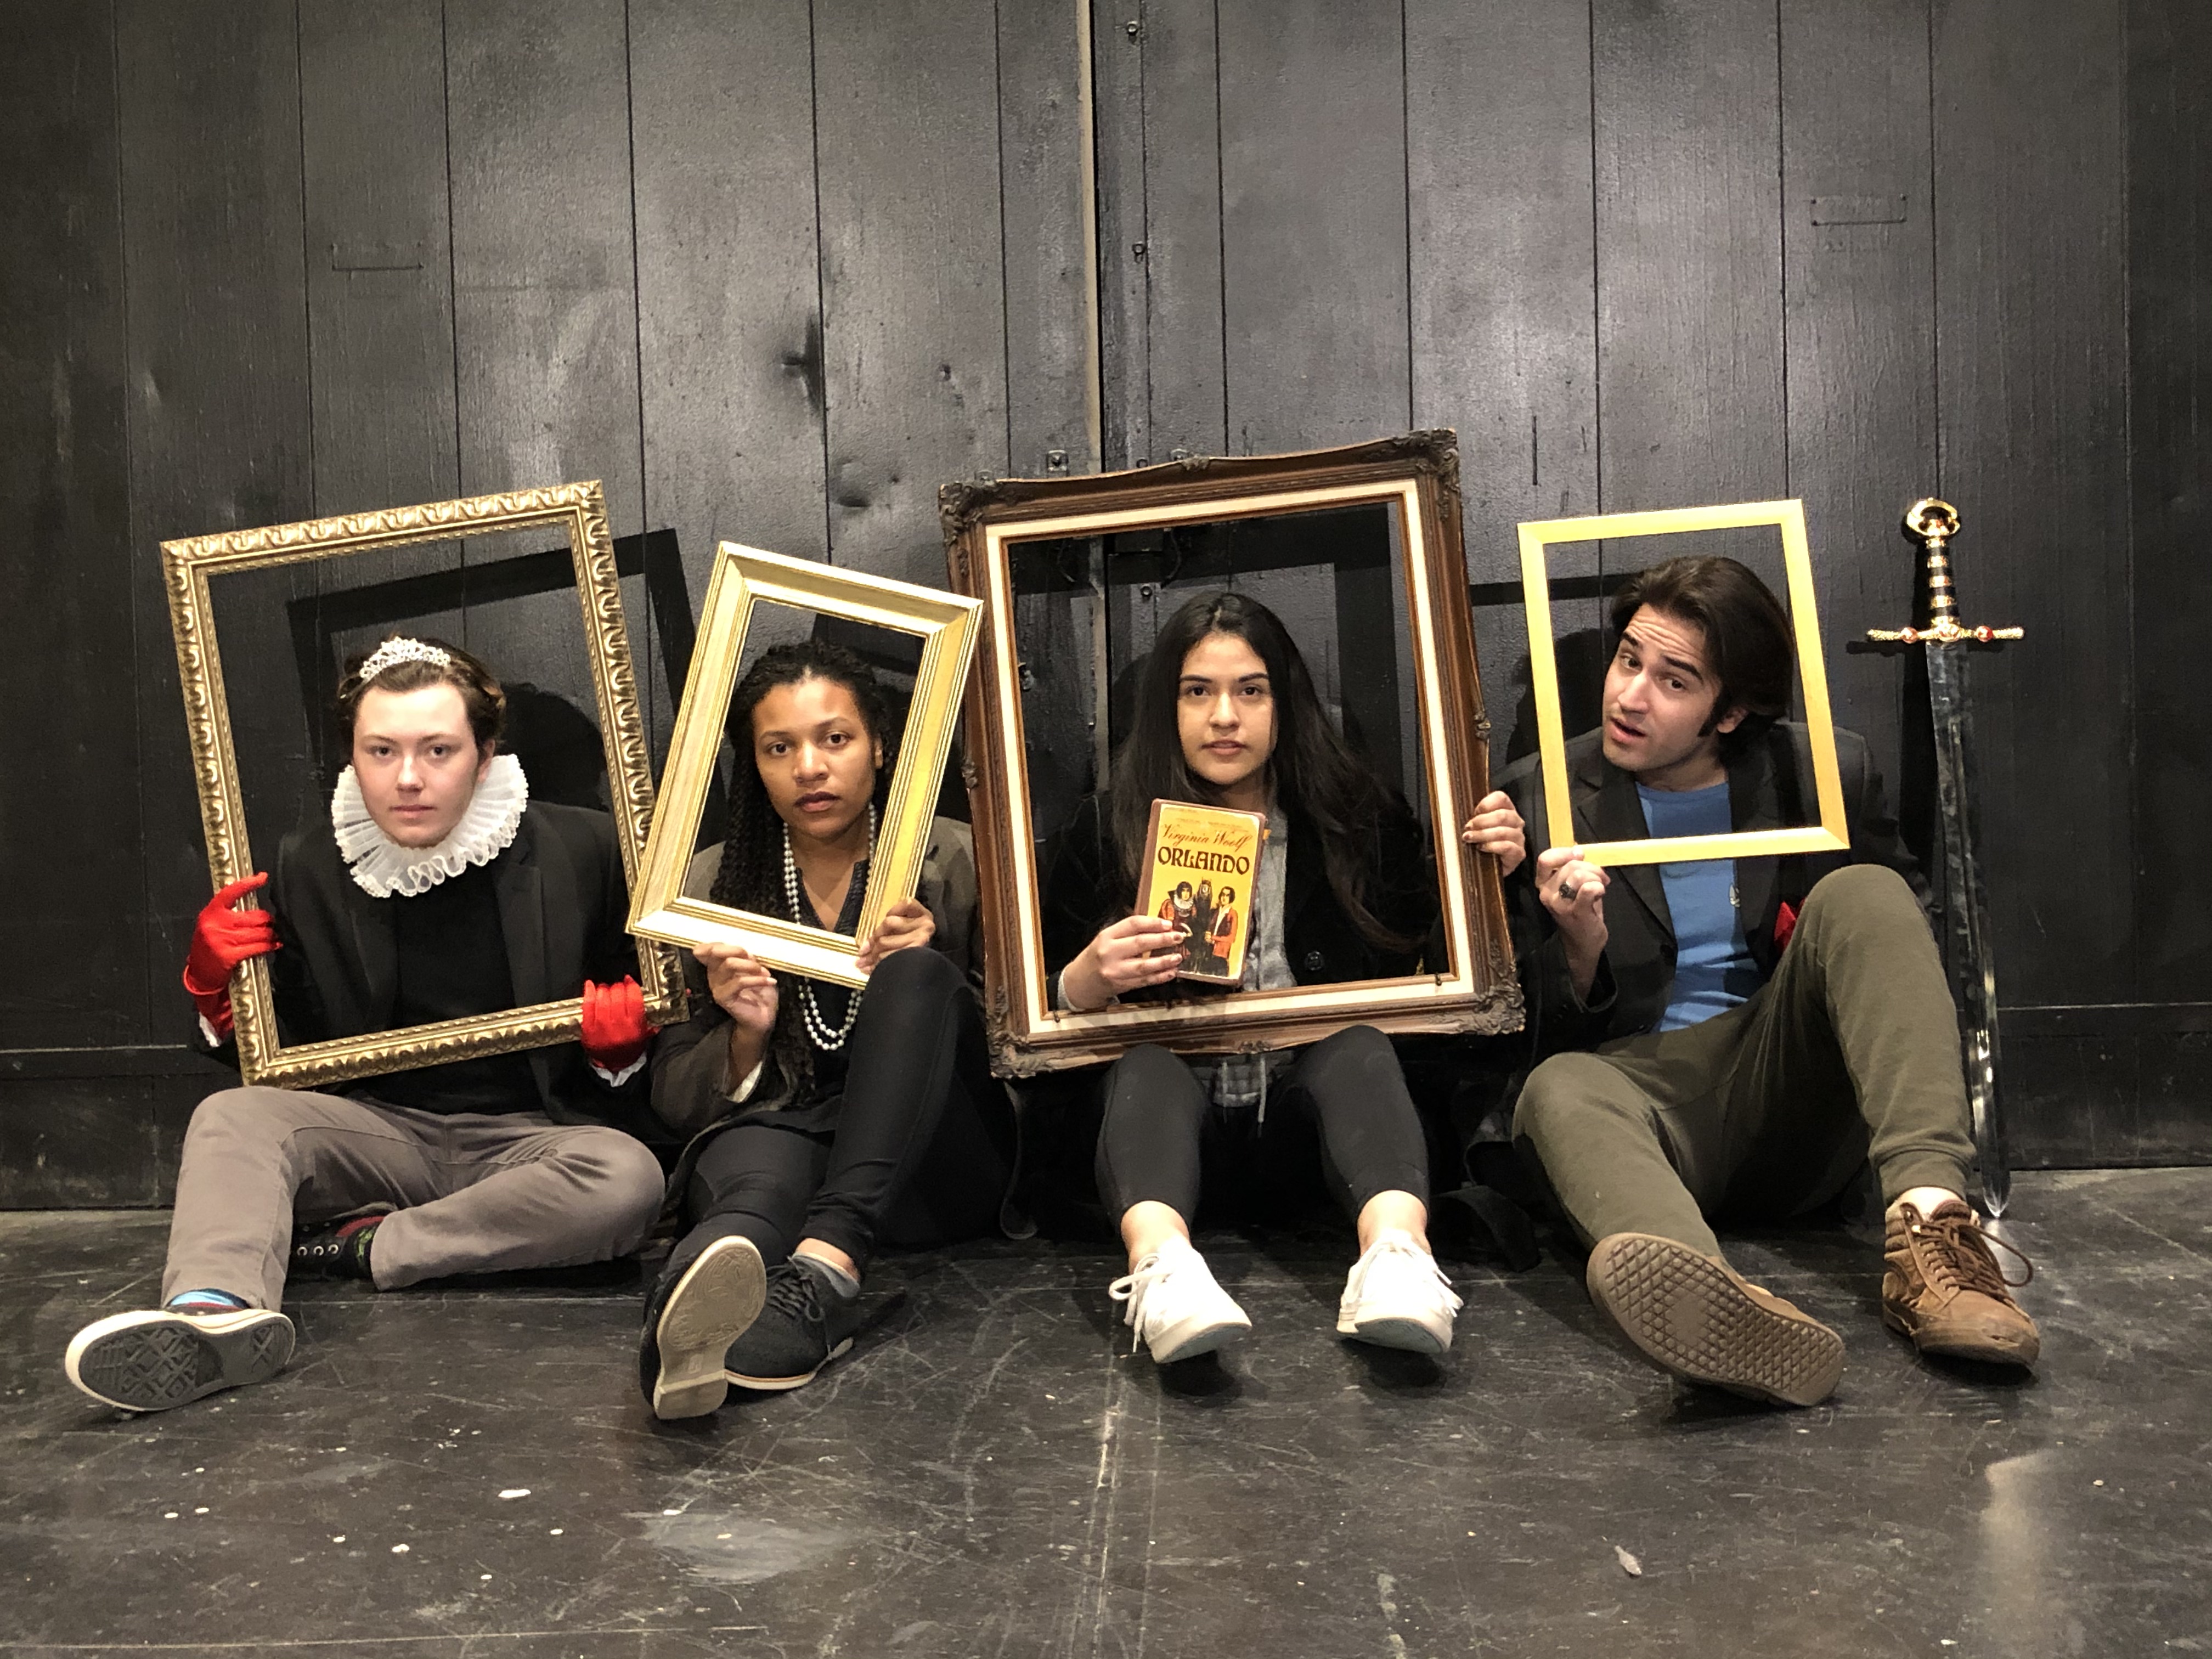 Four students sitting on the floor each with a frame around their faces, one of them holding the book titled Orlando.